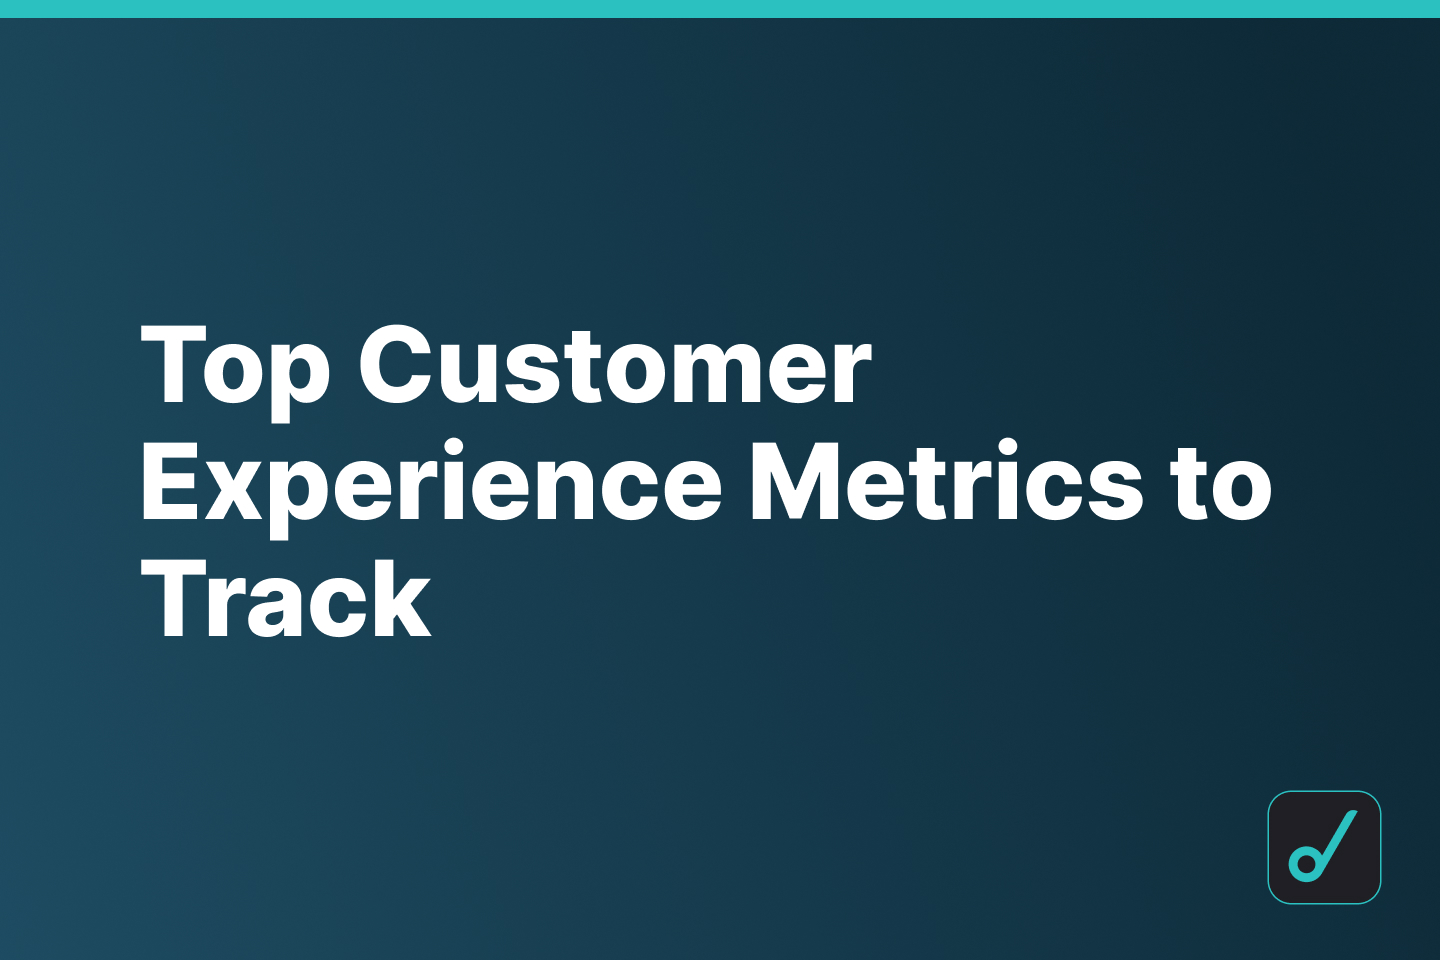 Top Customer Experience Metrics To Track in 2022